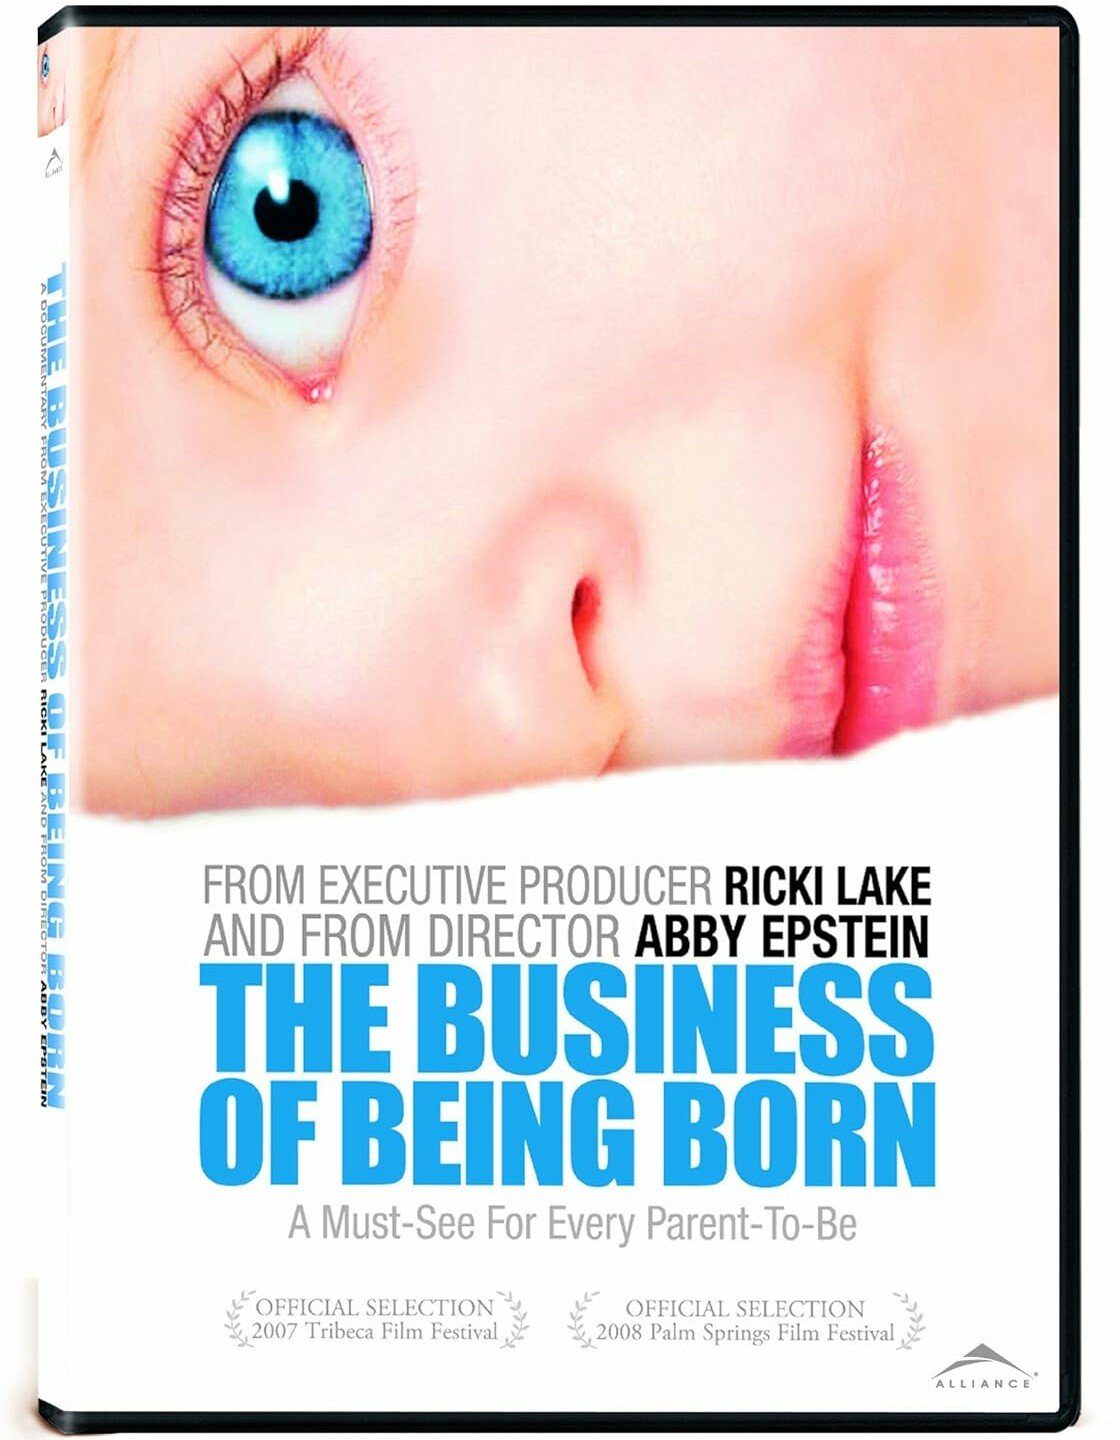 The Business of Being Born documentary cover